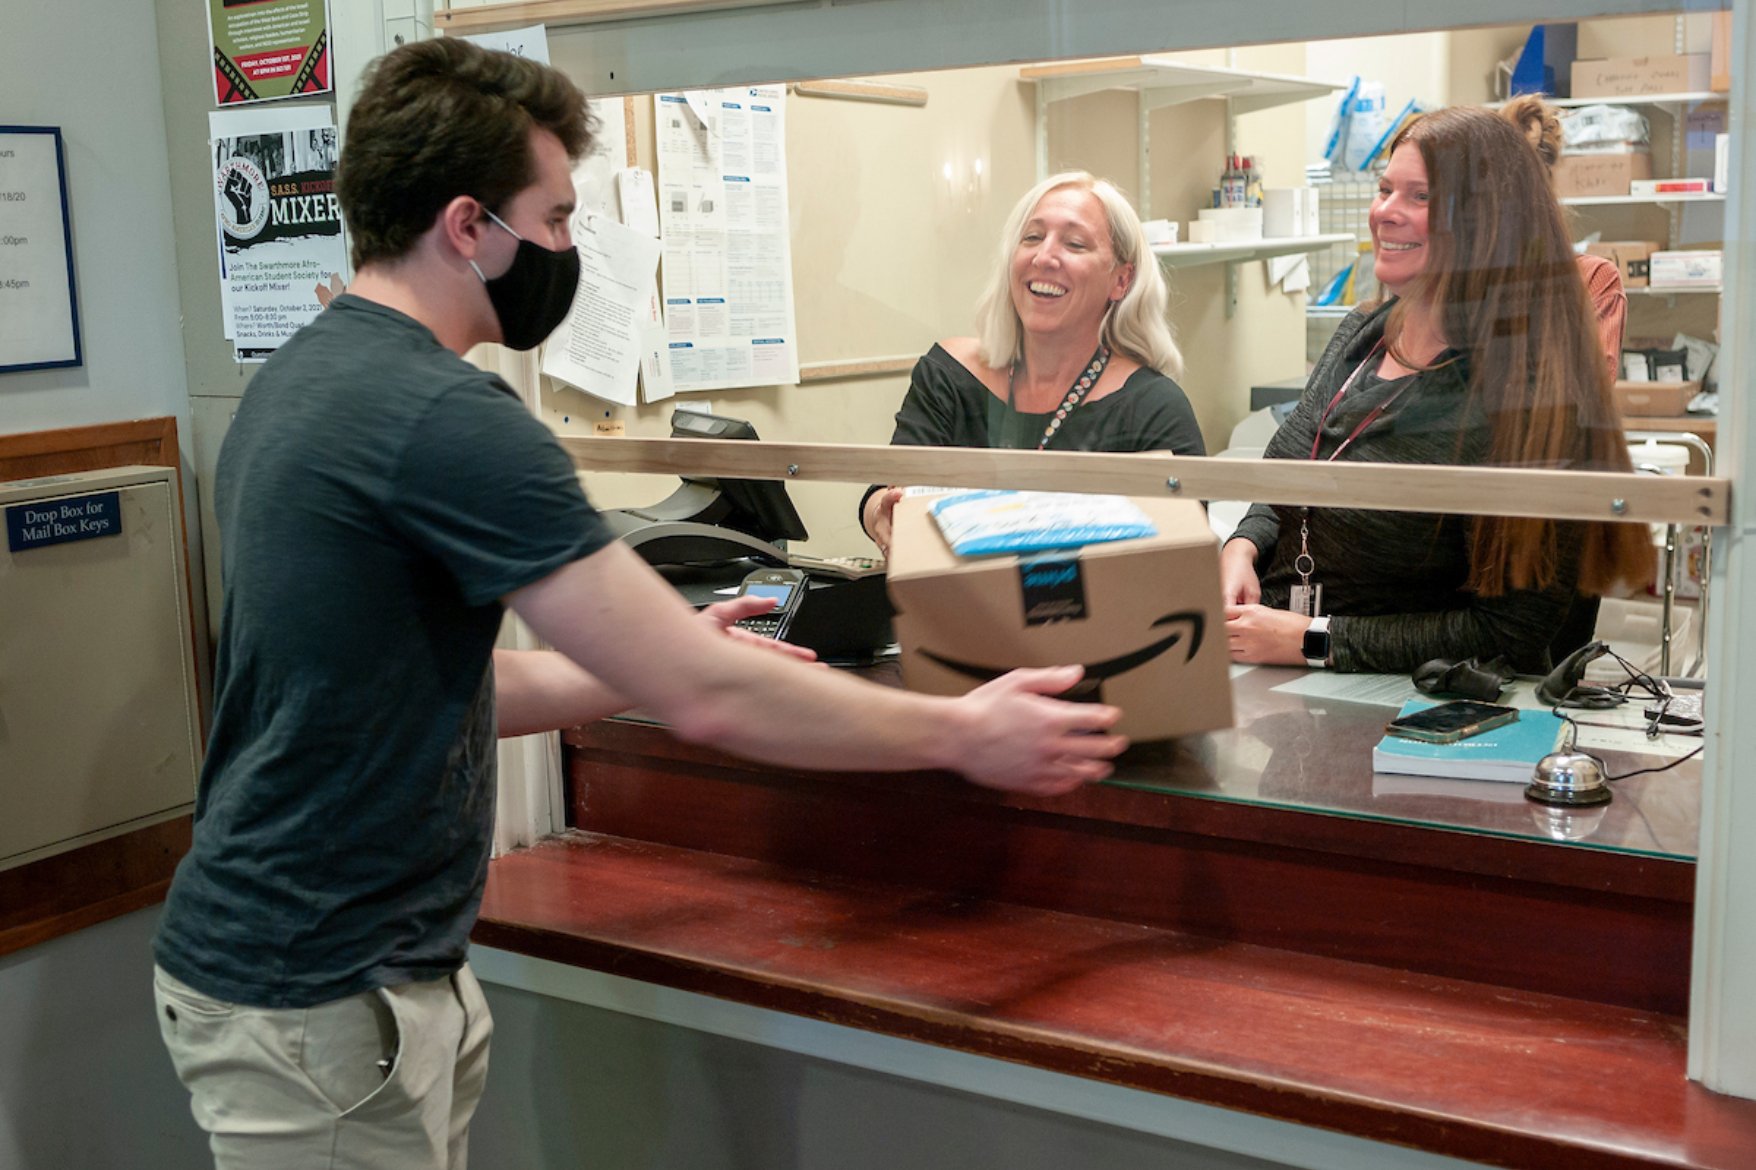 Man in grey shirt standing at the post office window, handing a package to two smiling women behind the counter